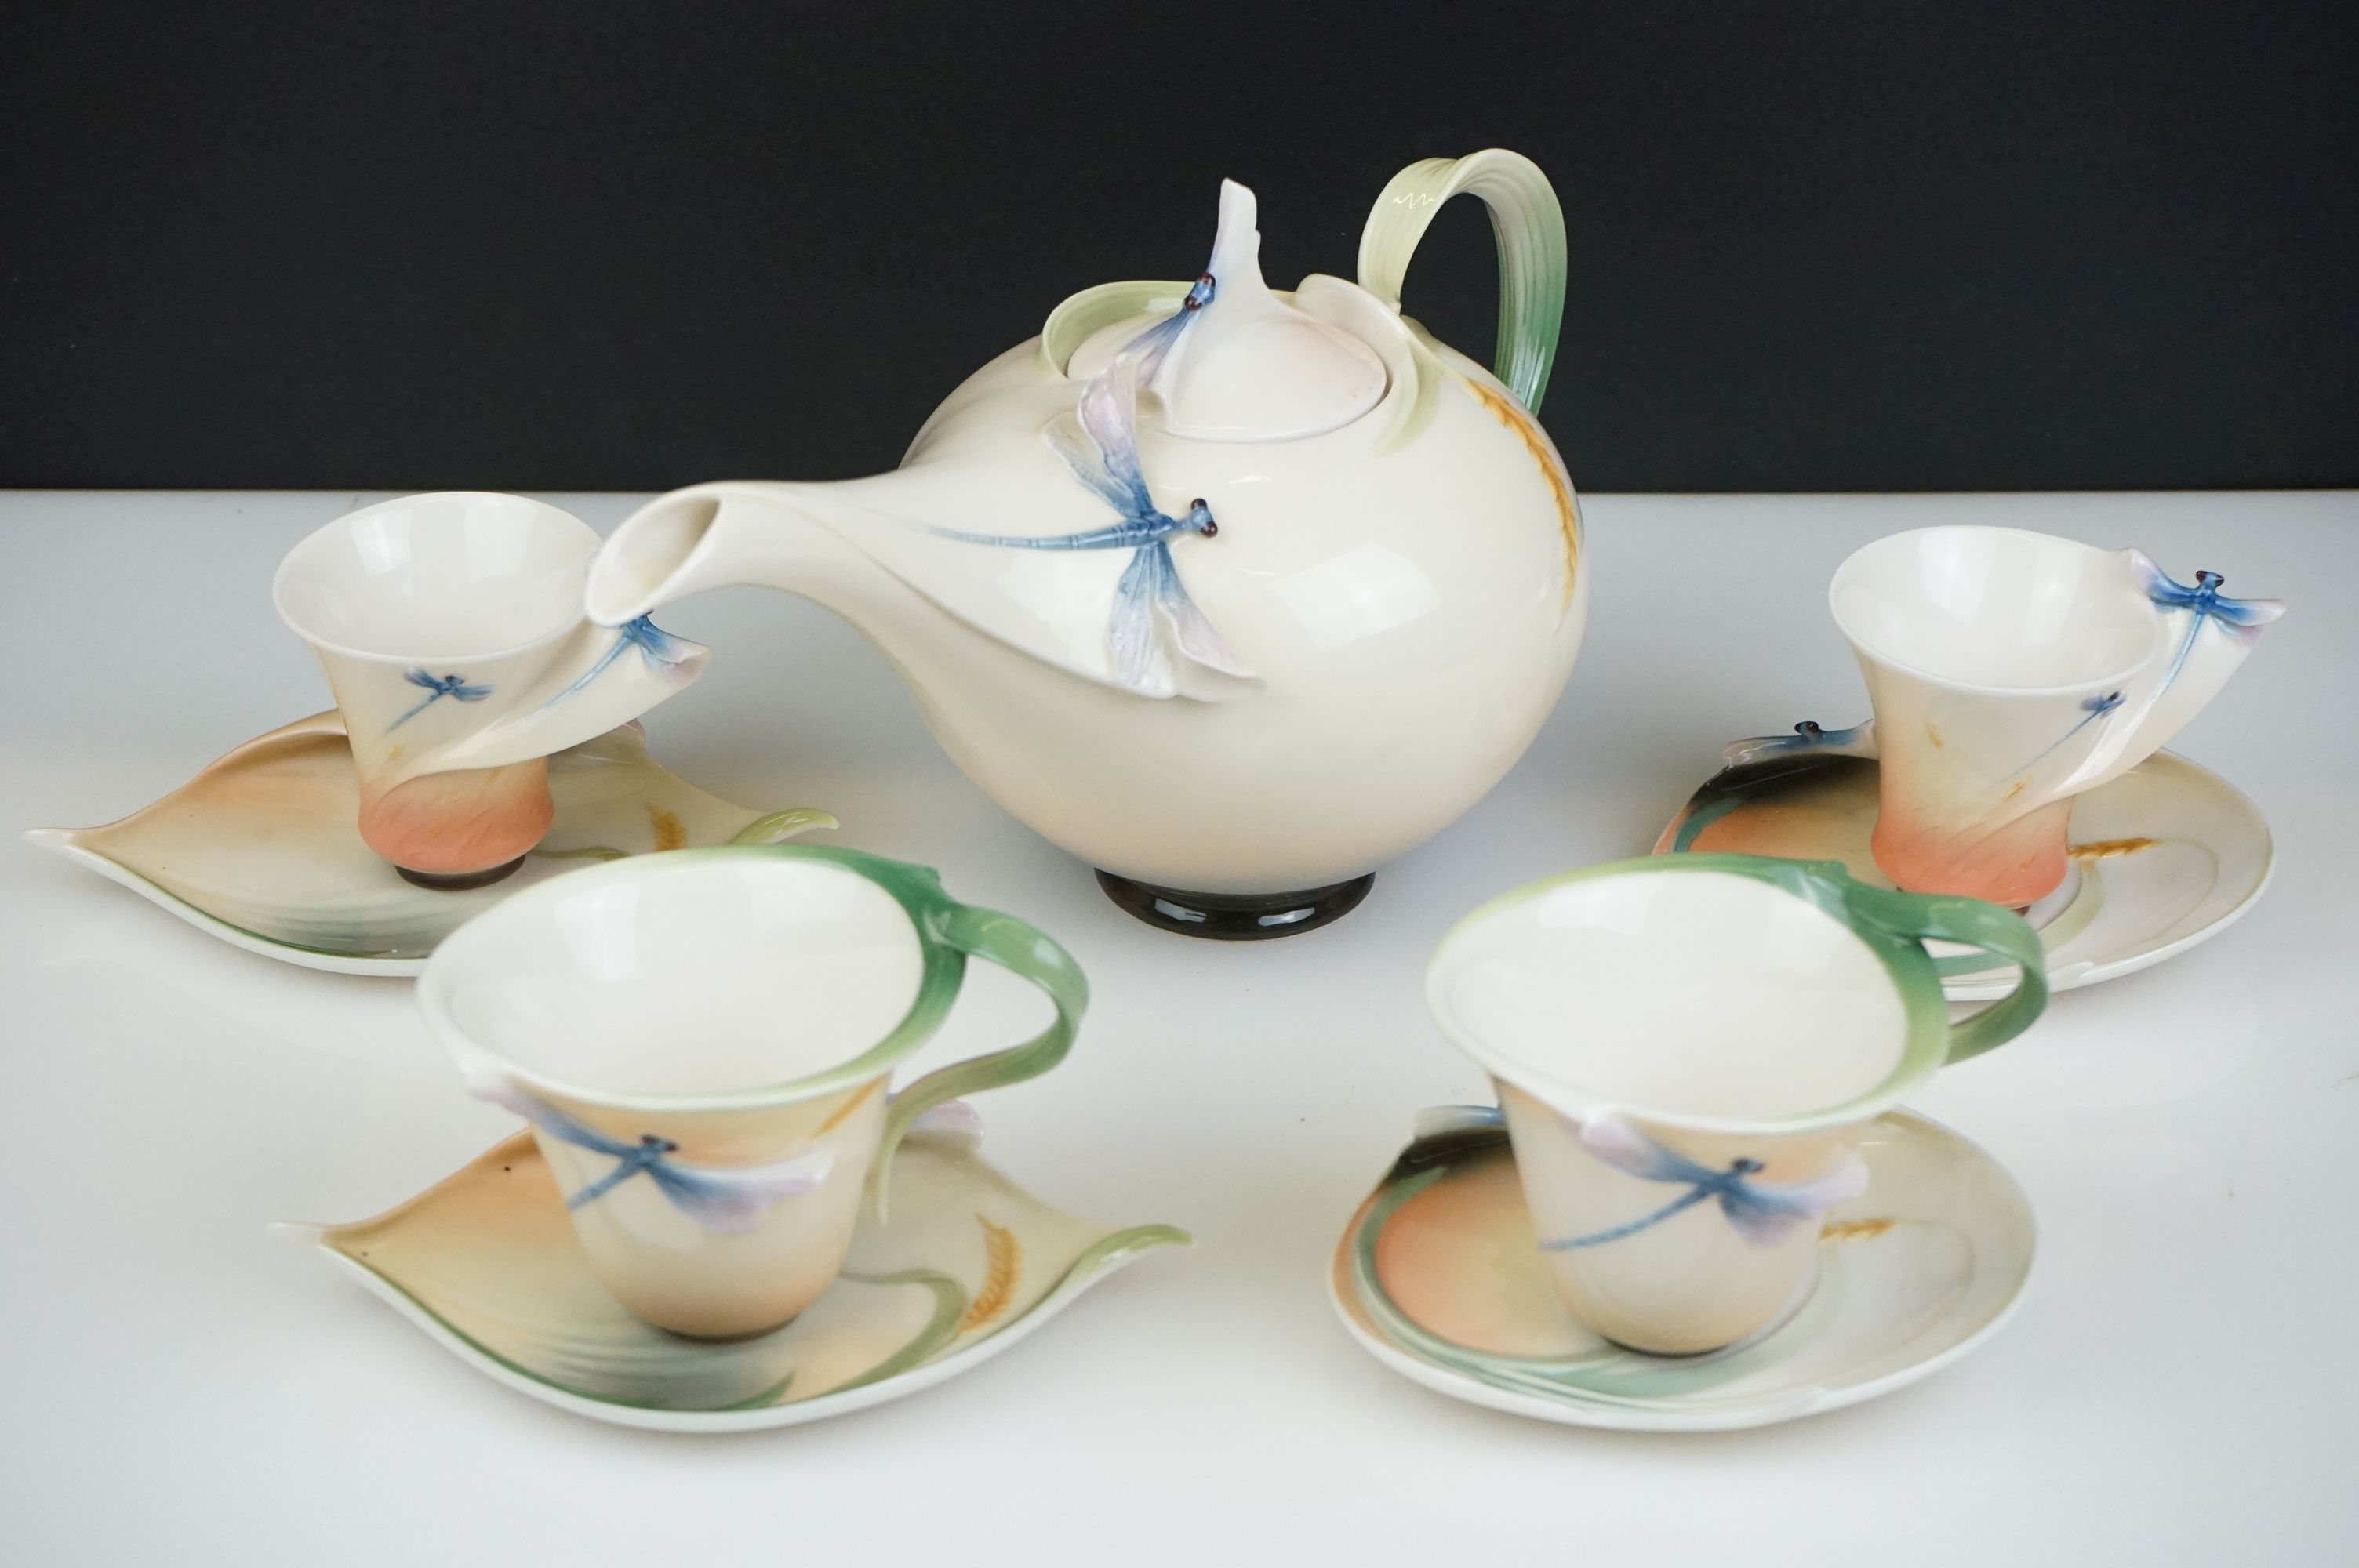 Franz Porcelain ' Dragonfly collection ' Tea ware including Tea Pot and Two Pairs of Cups and